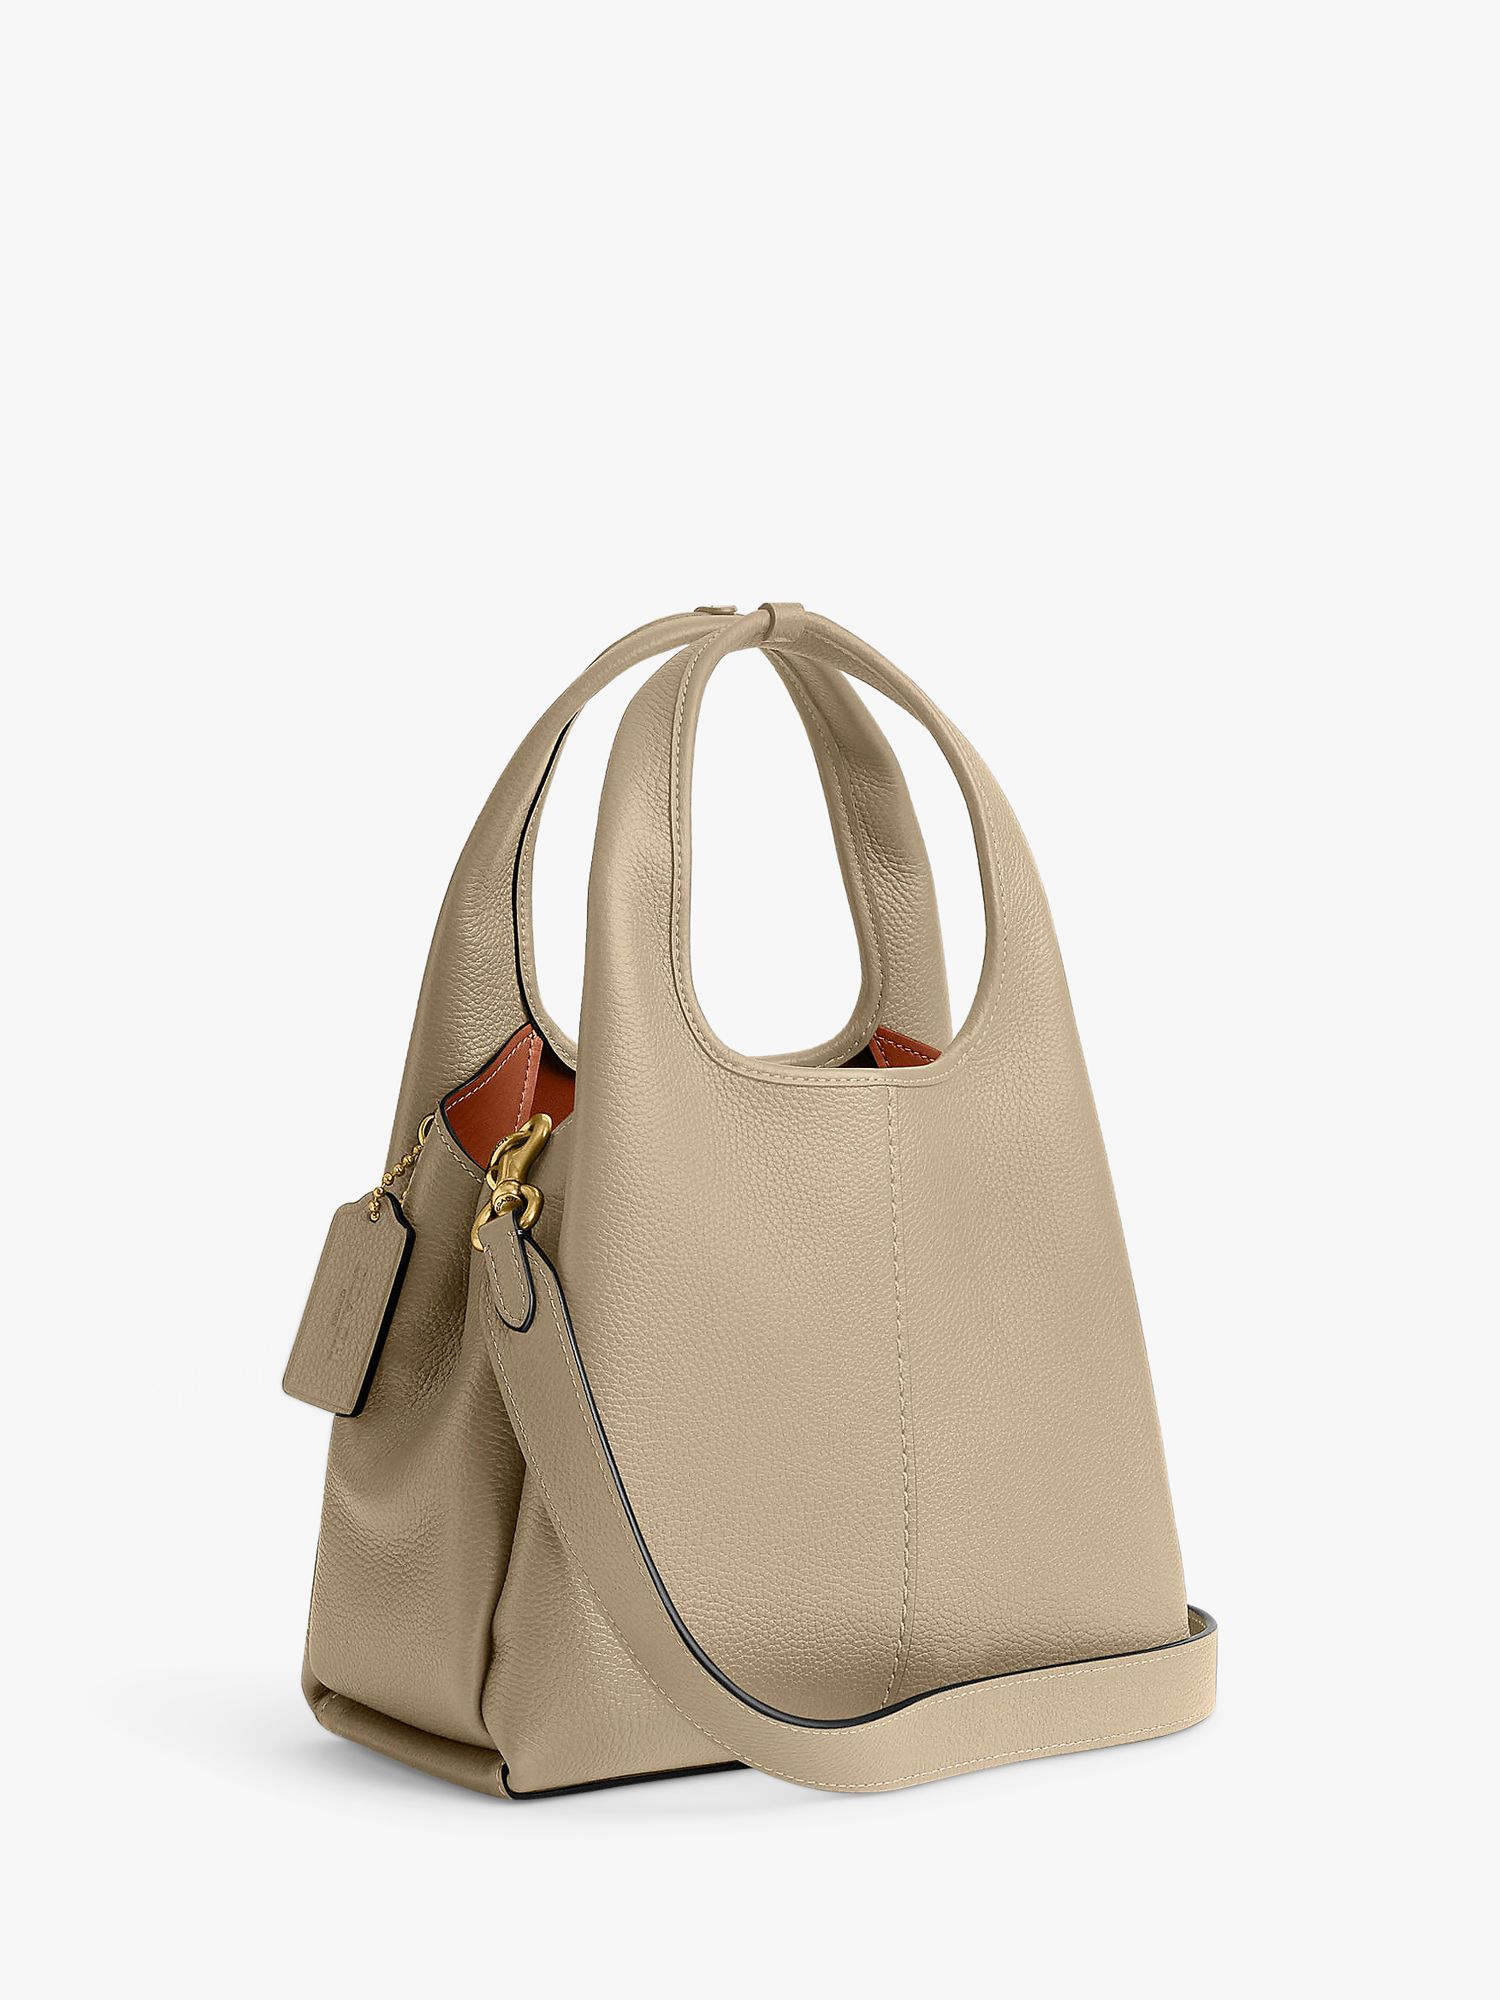 Buy Coach Lana 23 Small Leather Grab Bag Online at johnlewis.com